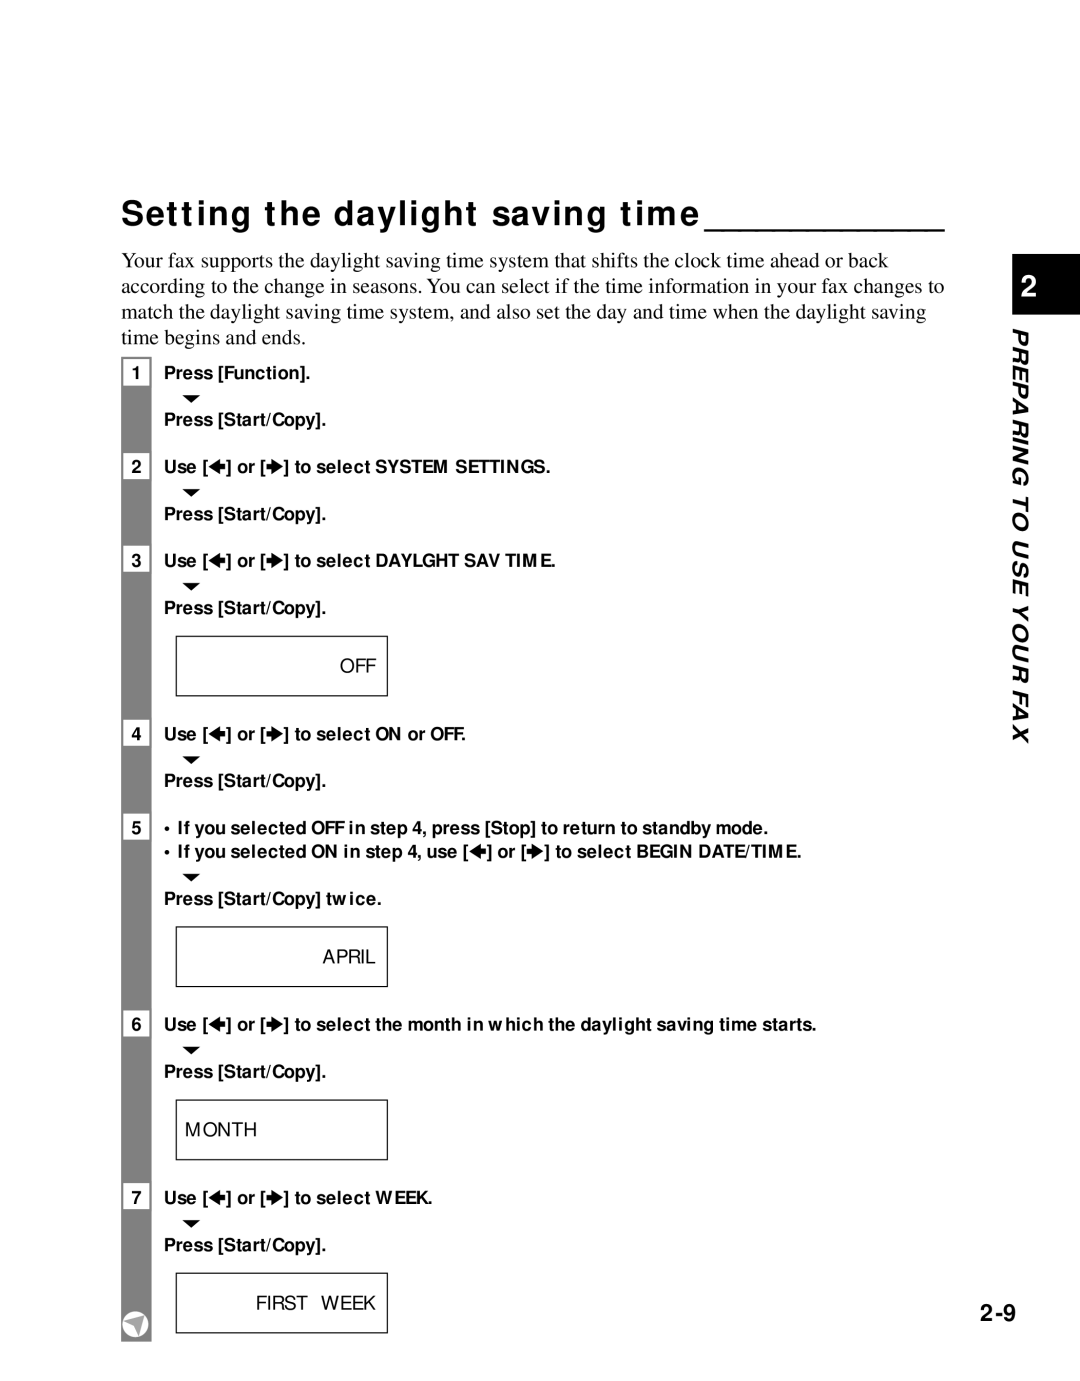 Canon B45 manual Setting the daylight saving time, Press Function, Use 3 or 4 to select on or OFF 